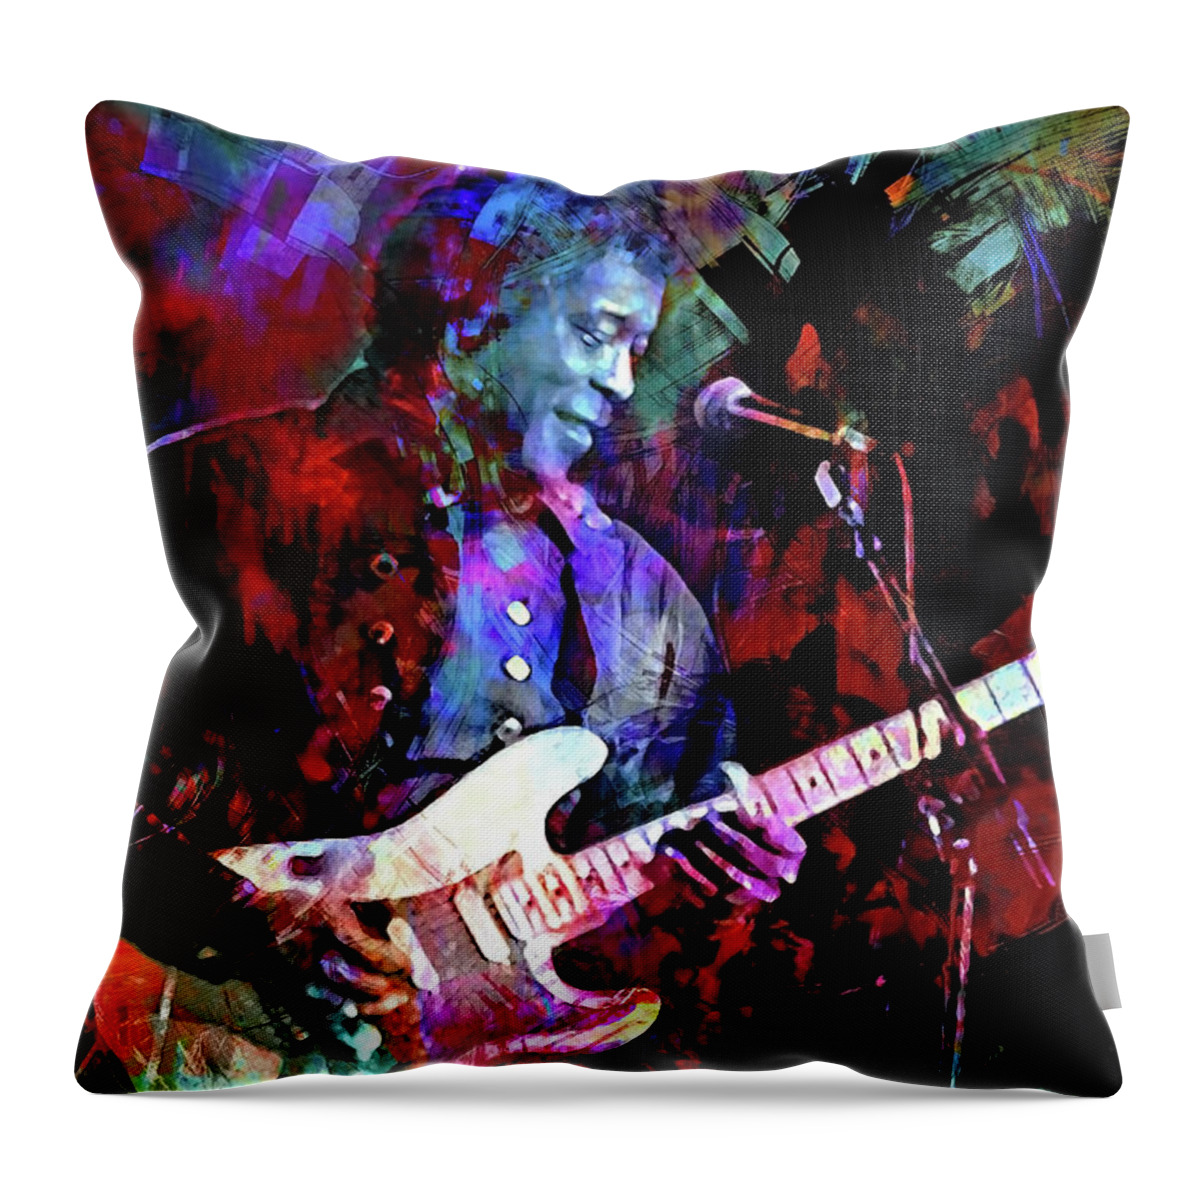 Buddy Guy Throw Pillow featuring the digital art First Time I met the Blues by Mal Bray